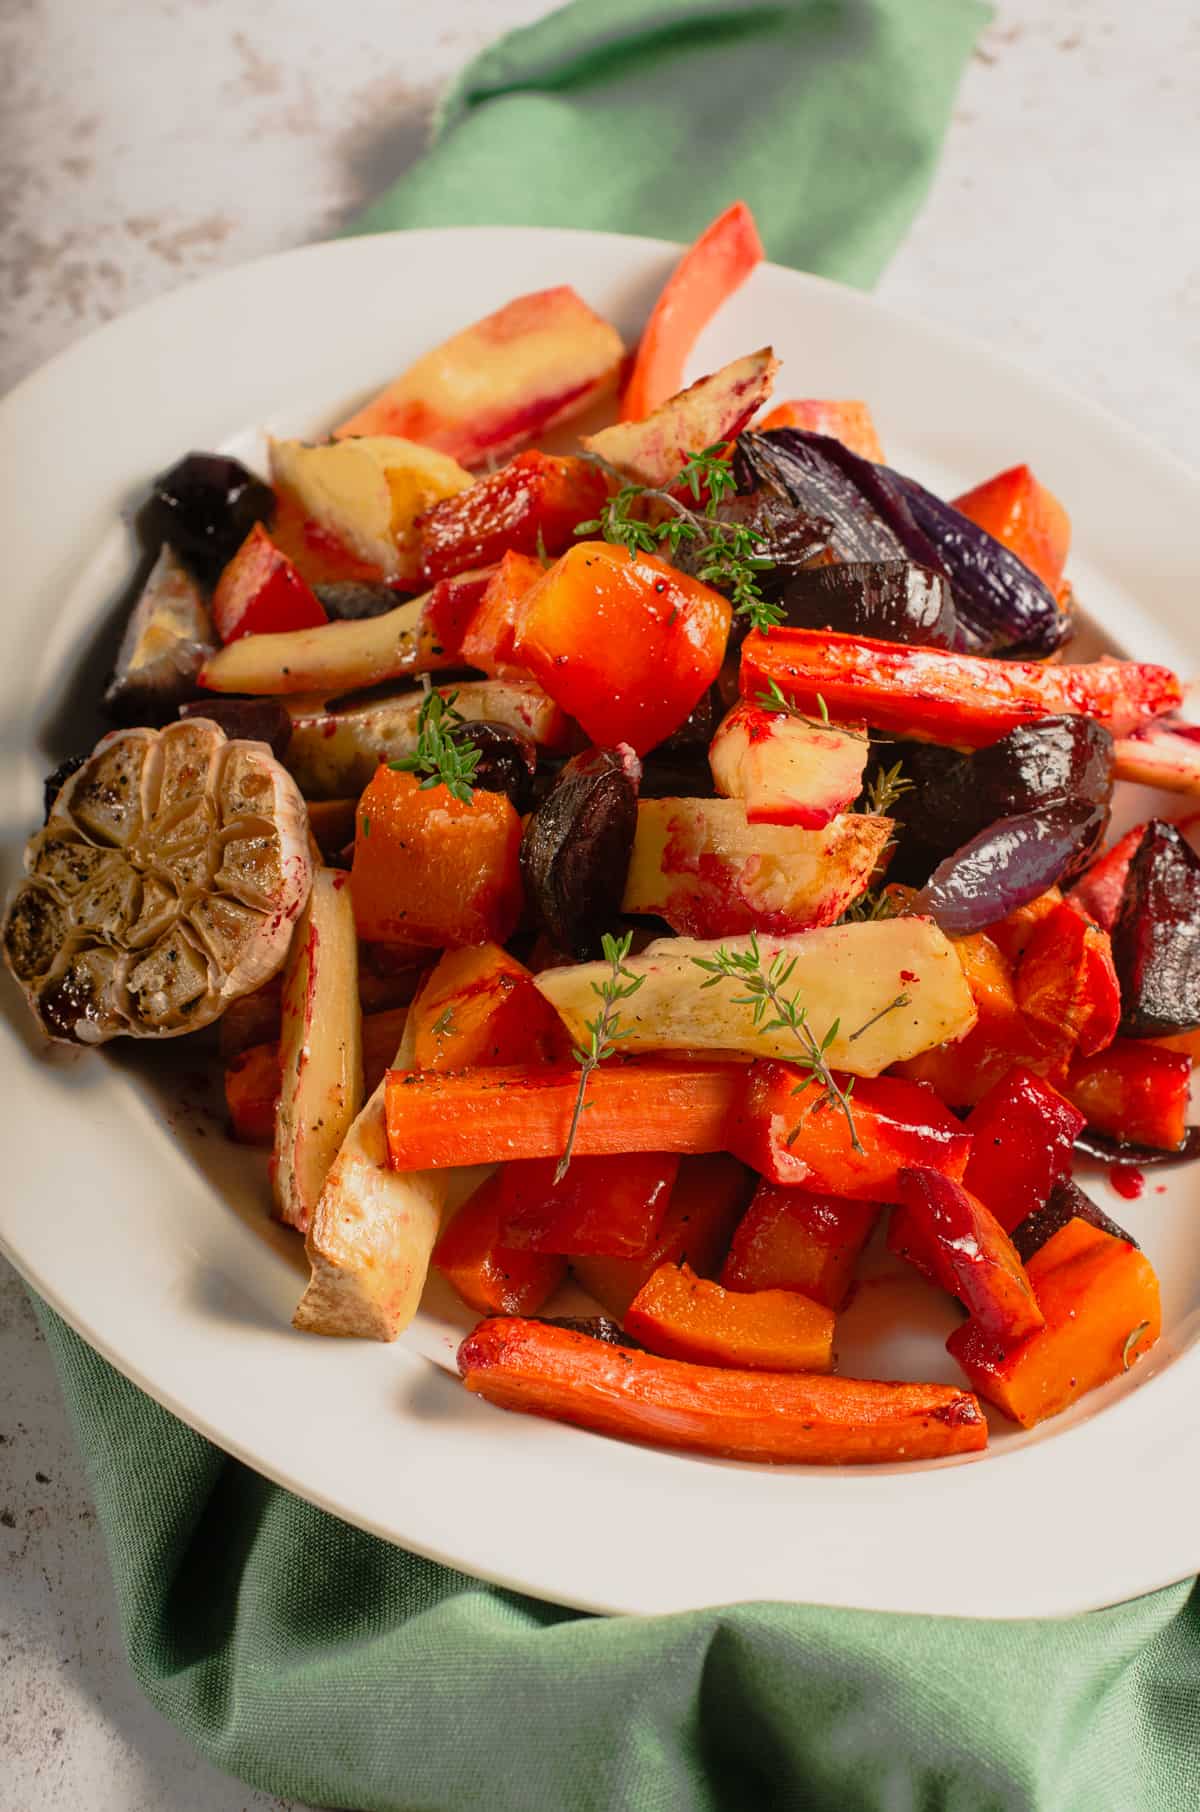 A platter filled with honey roasted vegetables and garlic.